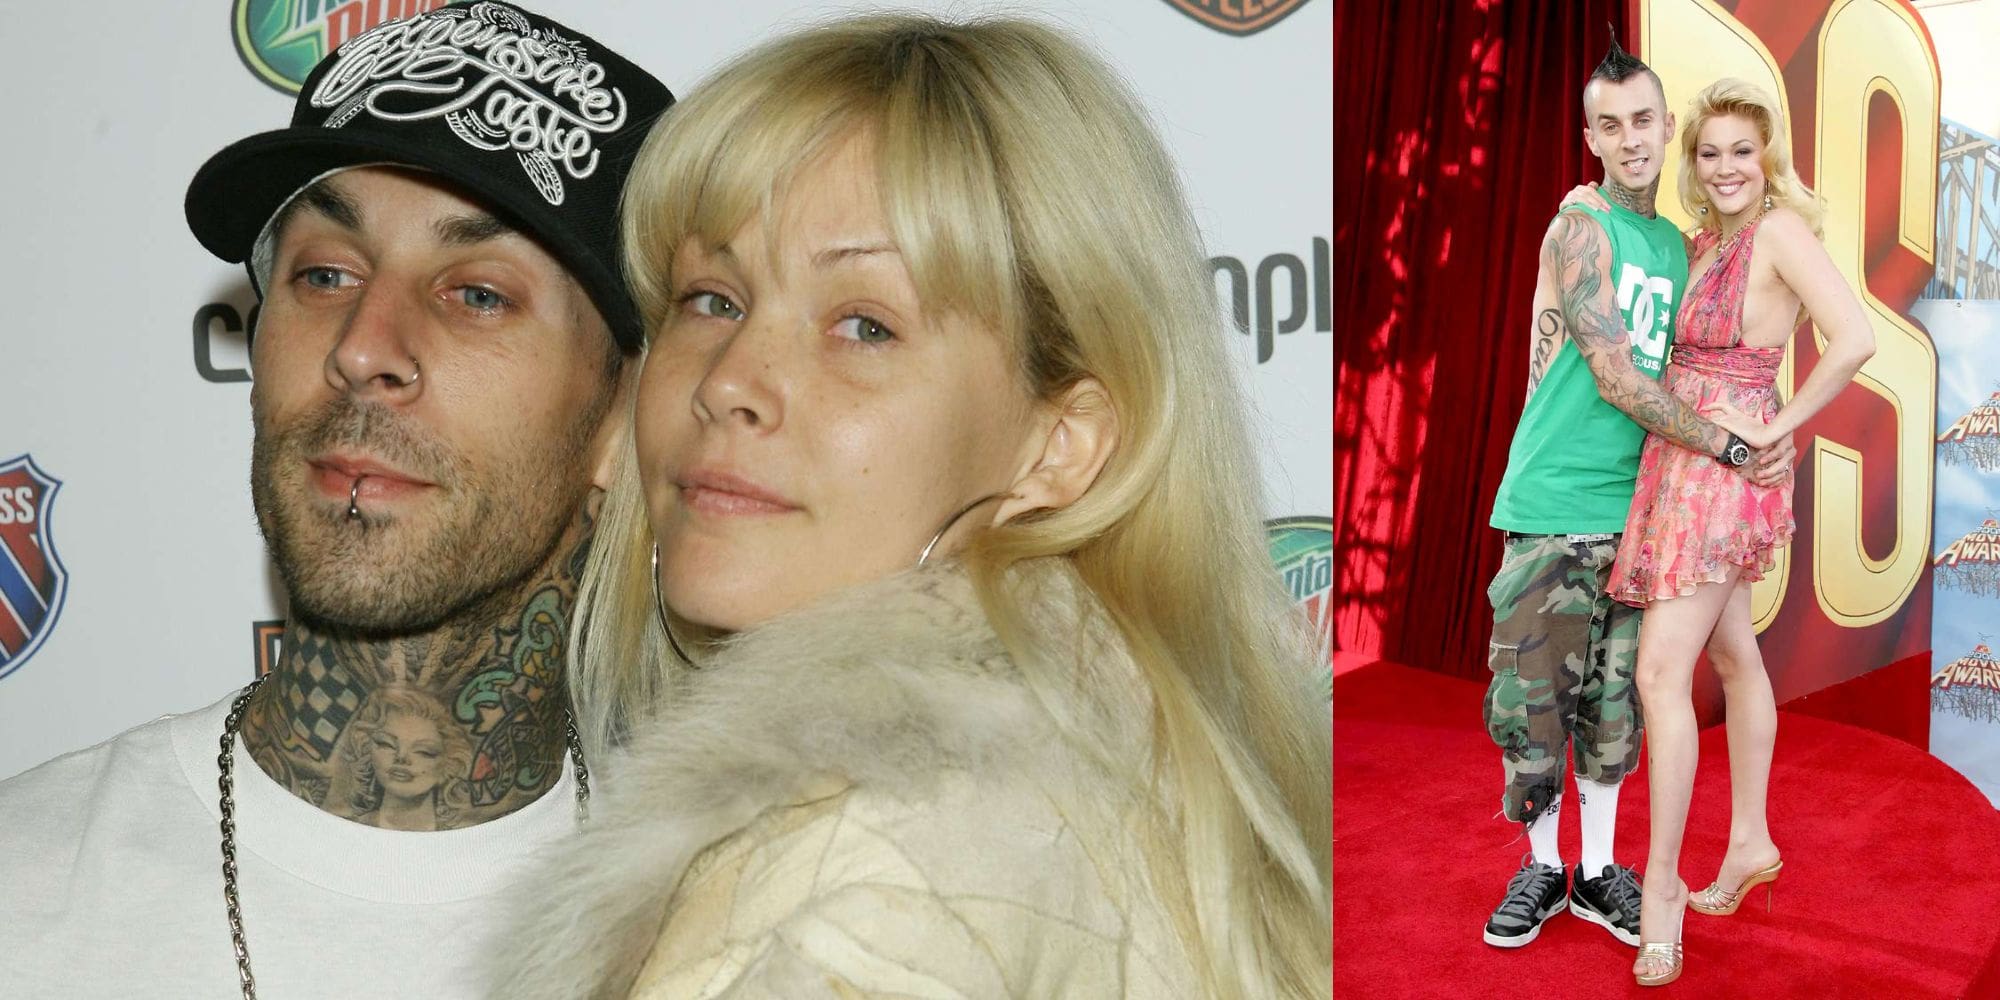 Shanna Moakler Alleges Travis Barker and Kim Kardashian Exchanged Texts Planning to Meet for Intimacy: Insights from the 'Dumb Blonde' Podcast